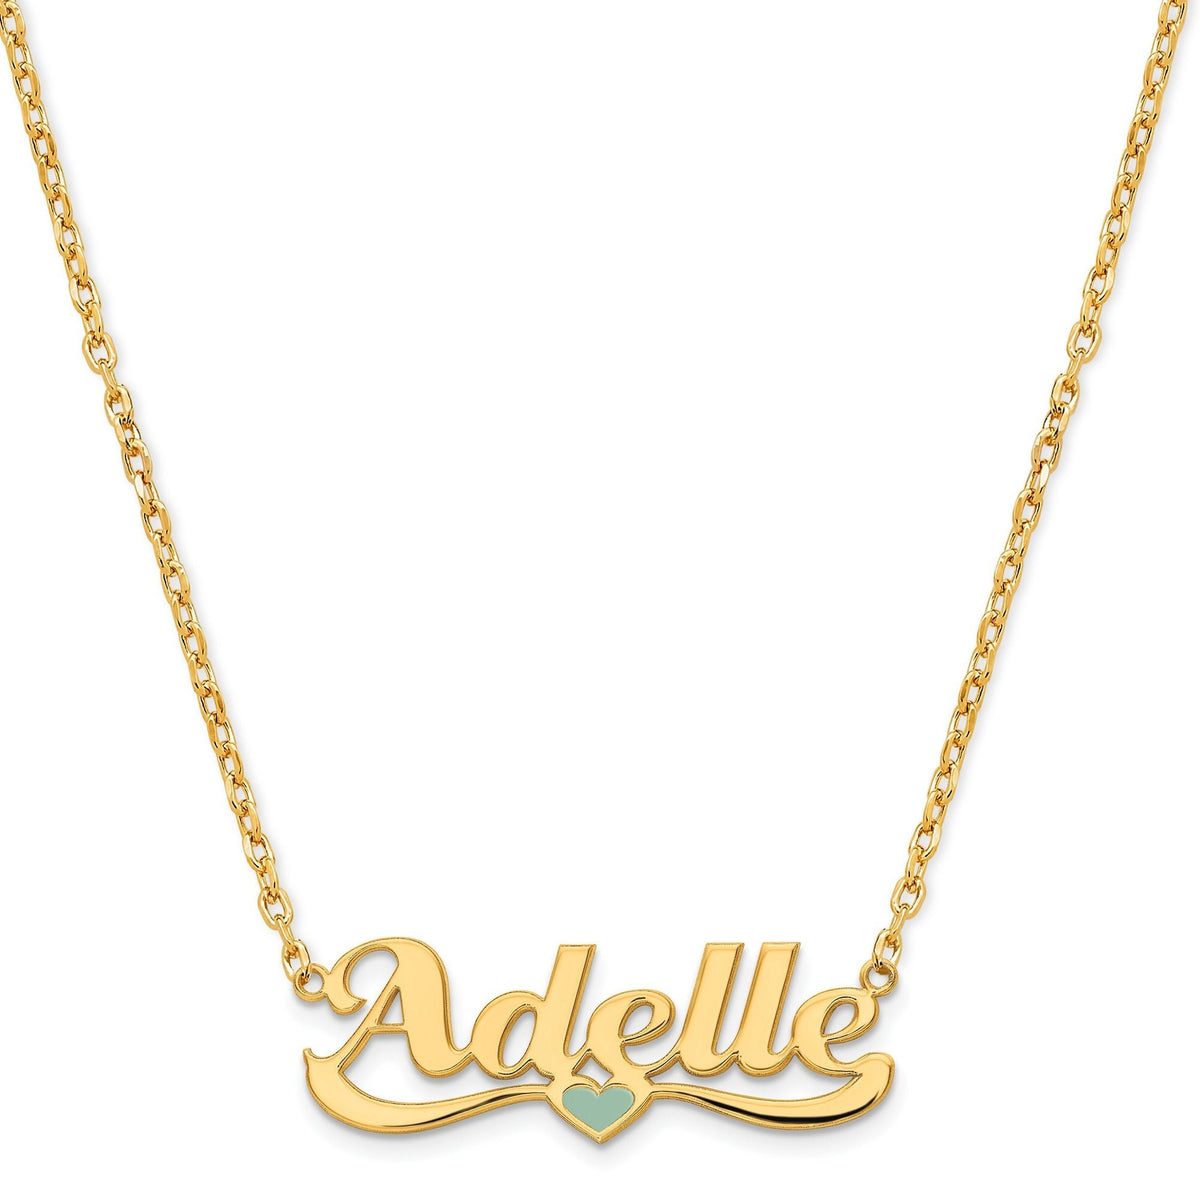 Personalized Name Pendant with Heart Epoxy Necklace (Multiple Colors Available) Gift Box Included (1.25 inches Wide)